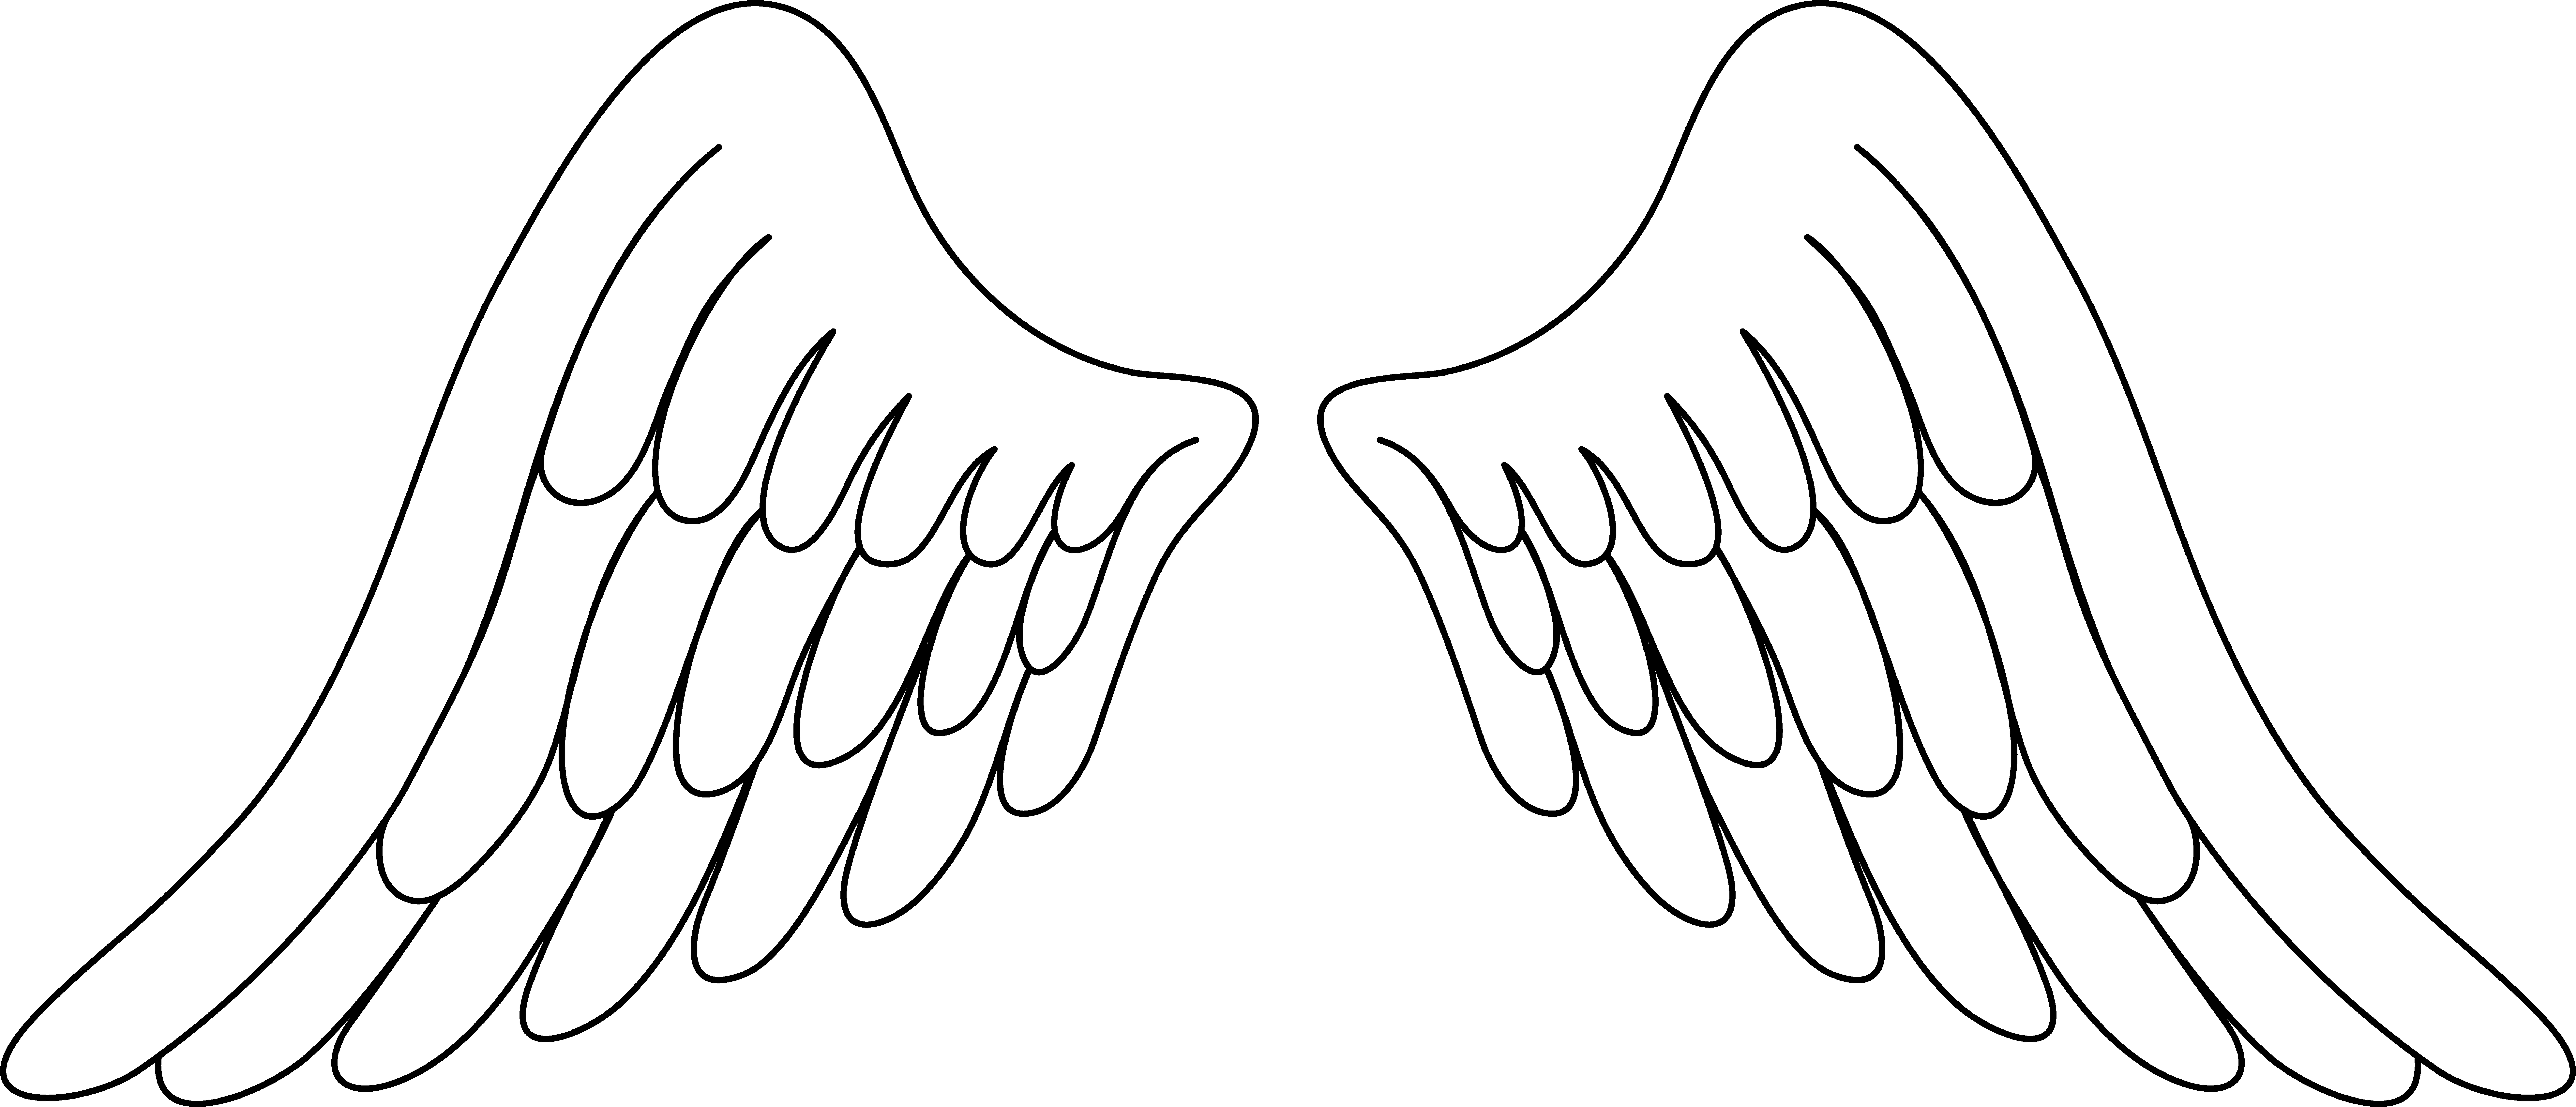 Angel wings wing clip. Knitting clipart sketch